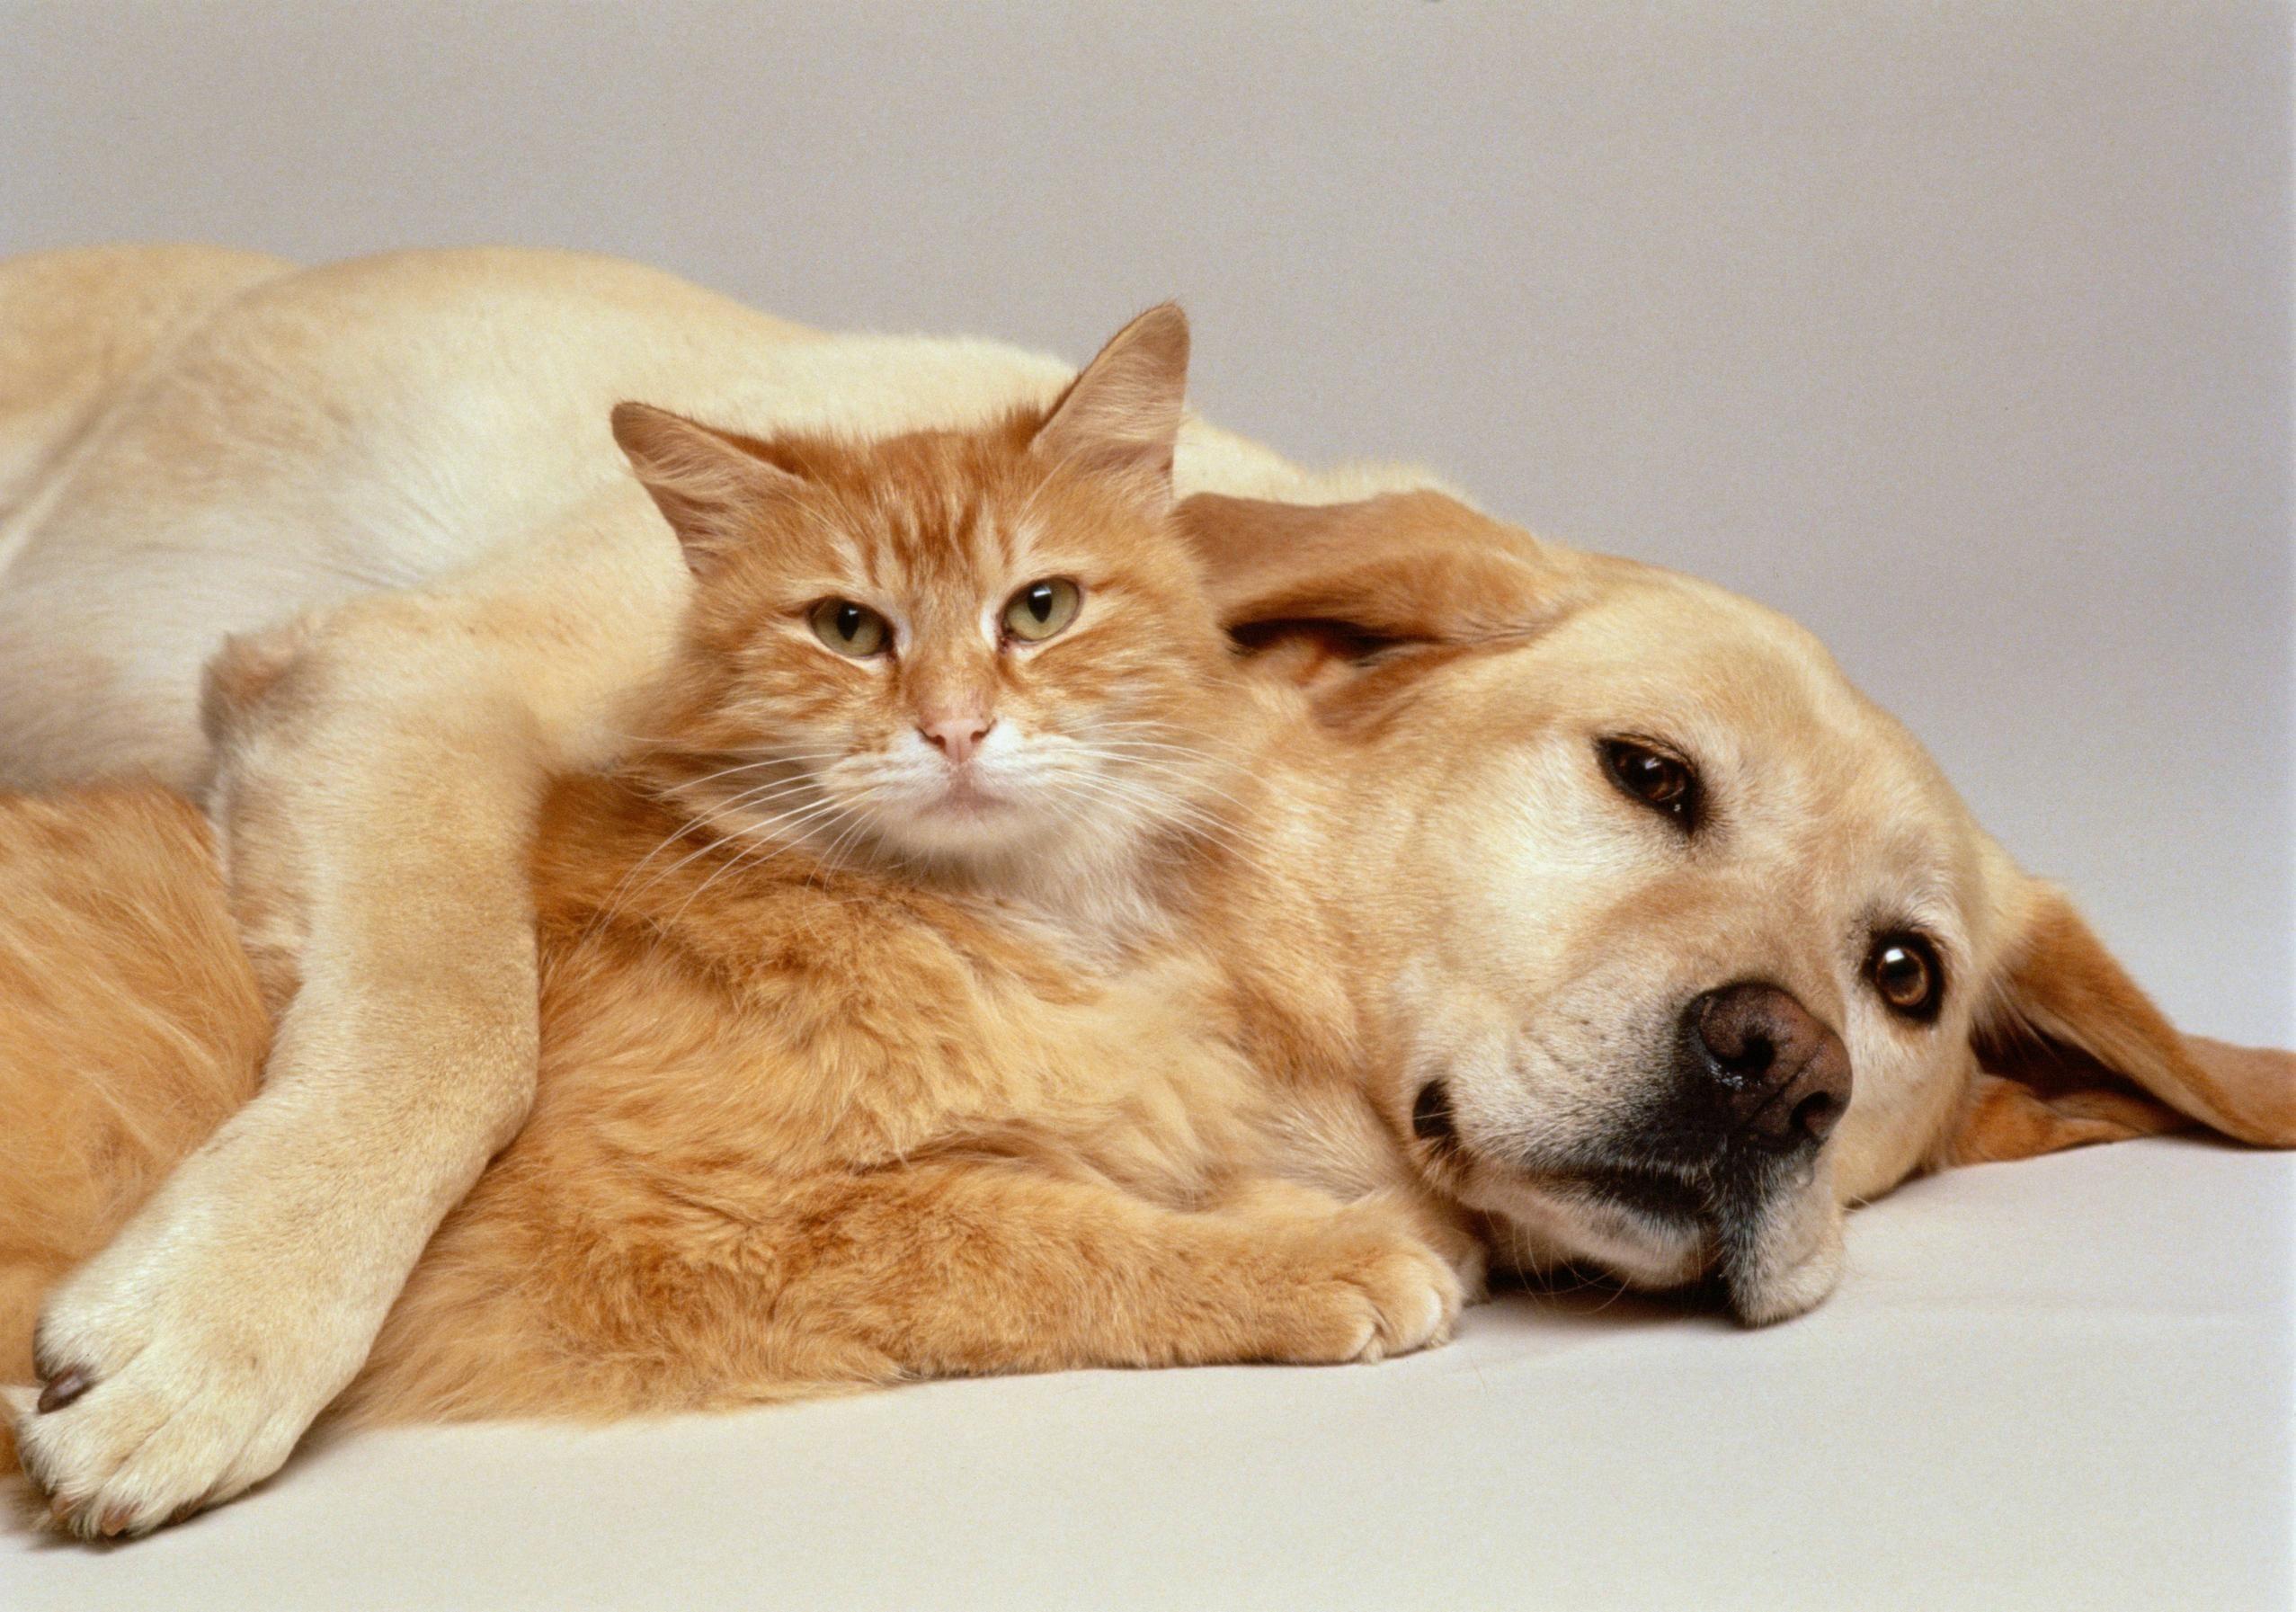 Cat & Dog Wallpapers